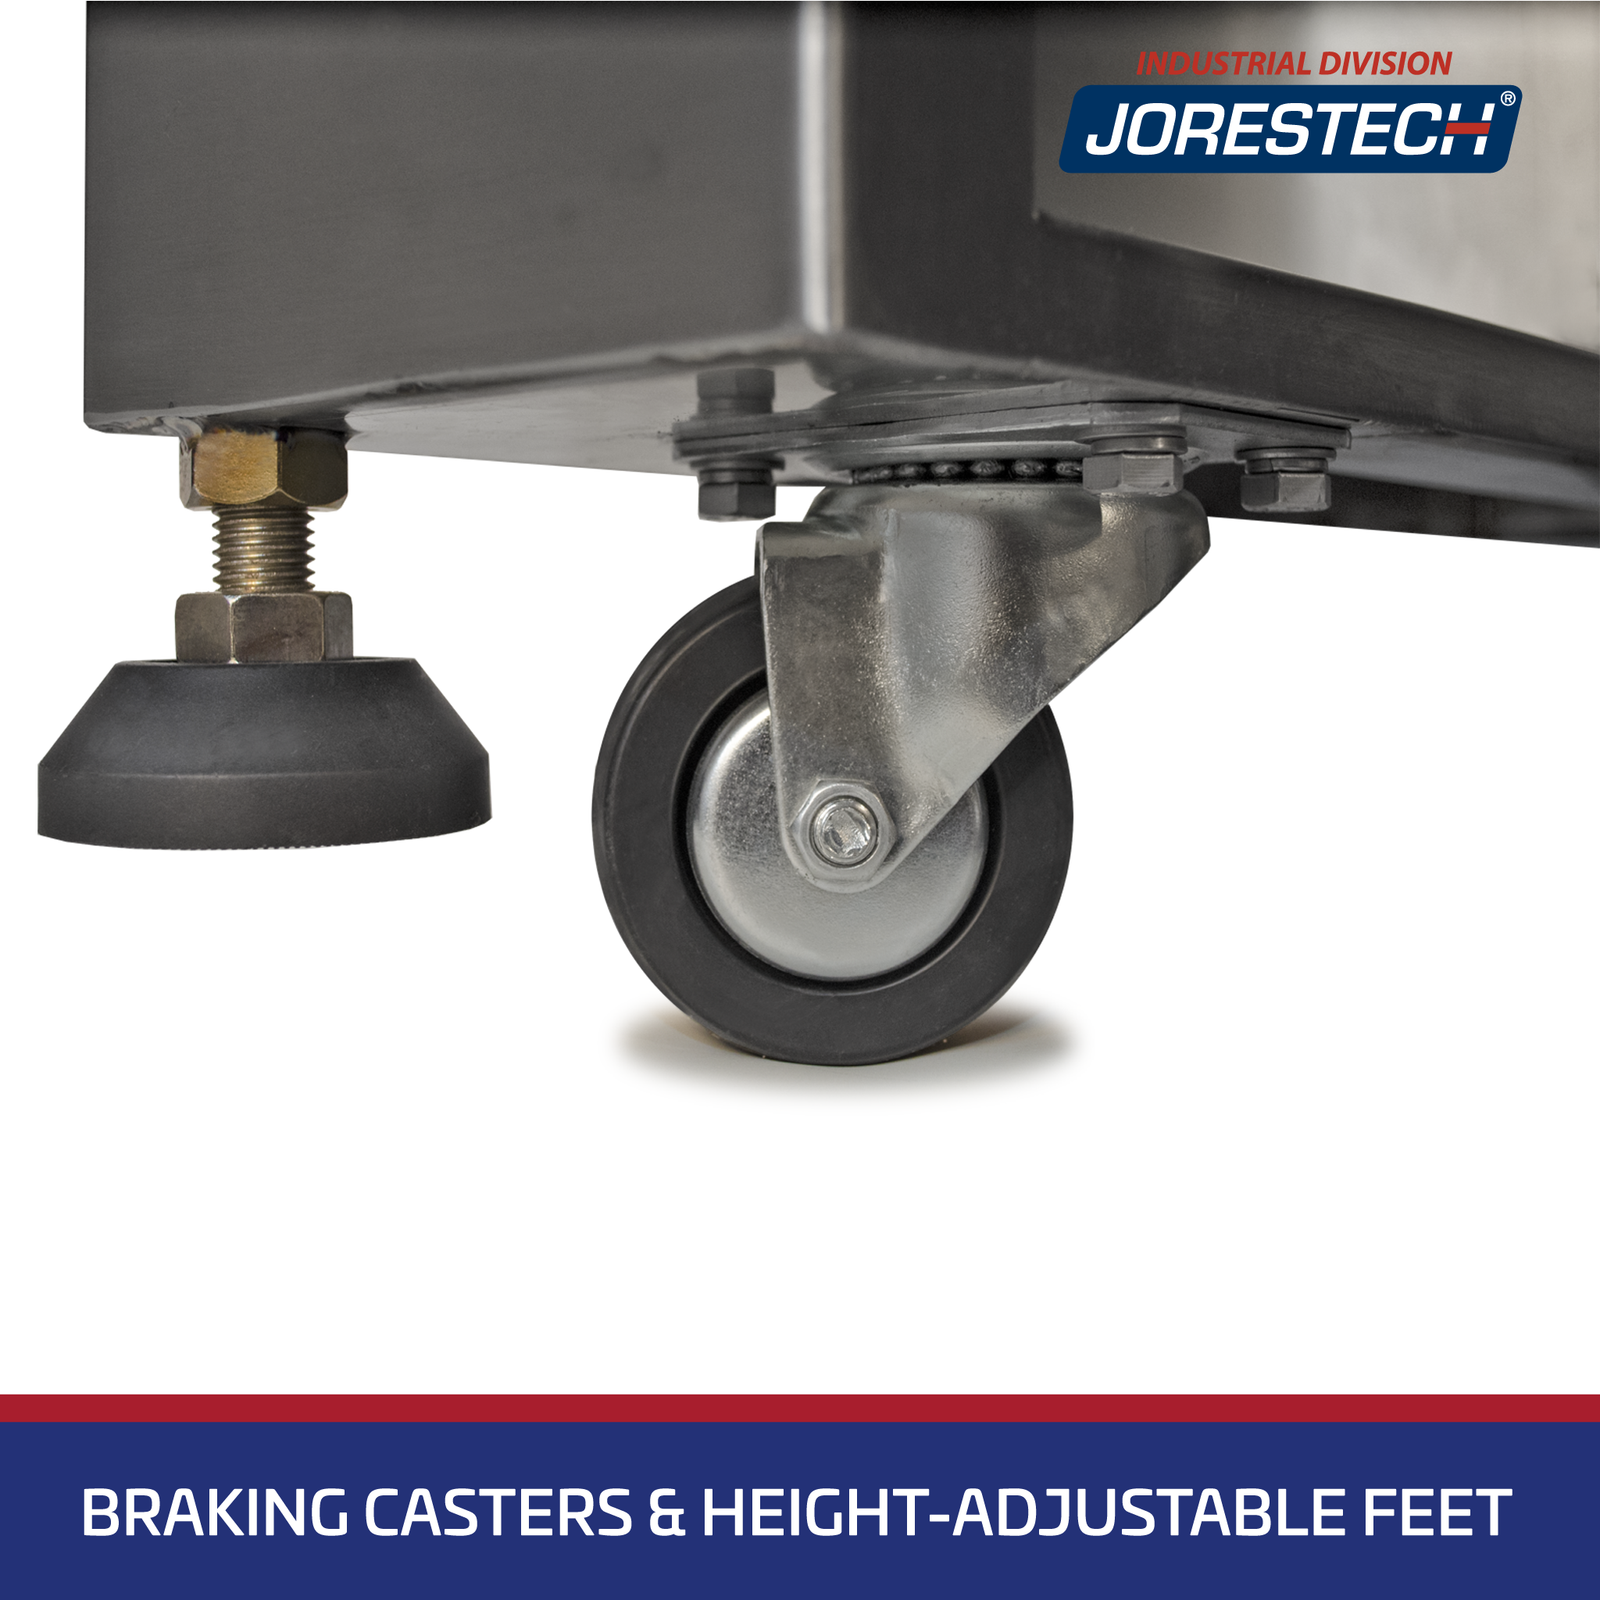 Close-up of the shrink wrapping legs and casters. There’s white text over blue background that reads “Breaking casters and height-adjustable feet”.